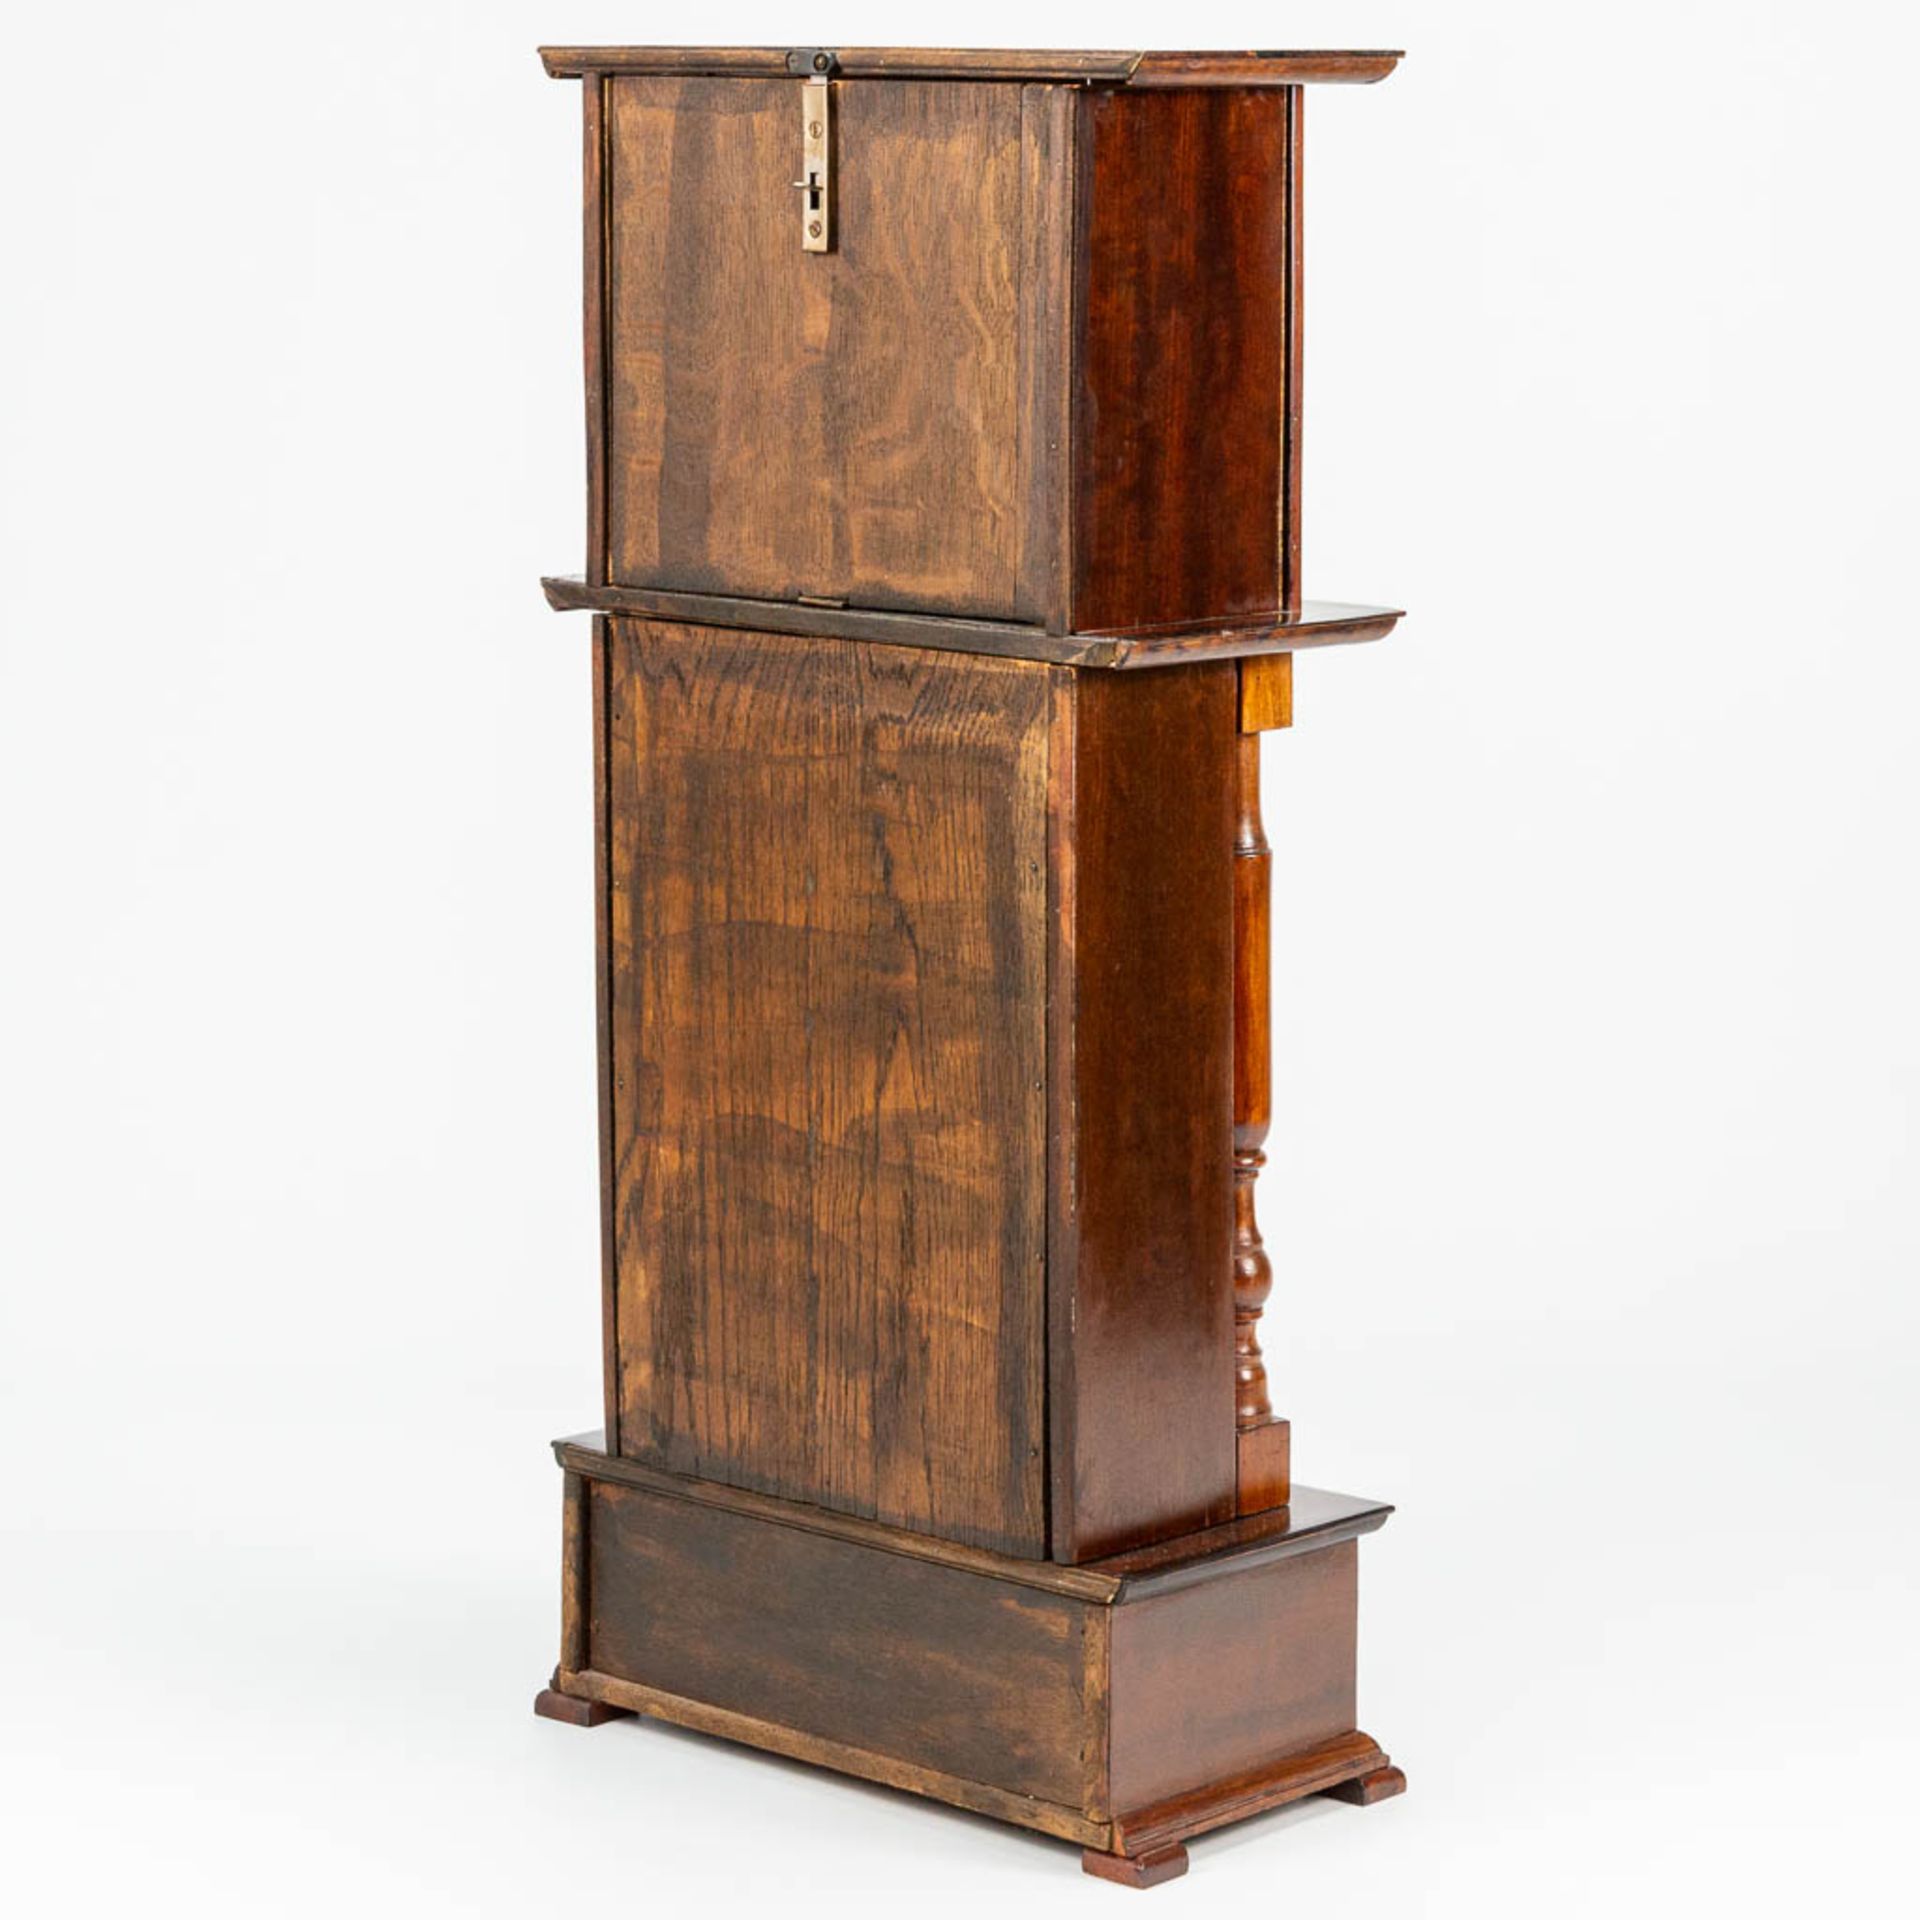 A table clock made of marquetry inlay, 19th century clock in a 20th century case. (17,5 x 34 x 73 cm - Image 13 of 16